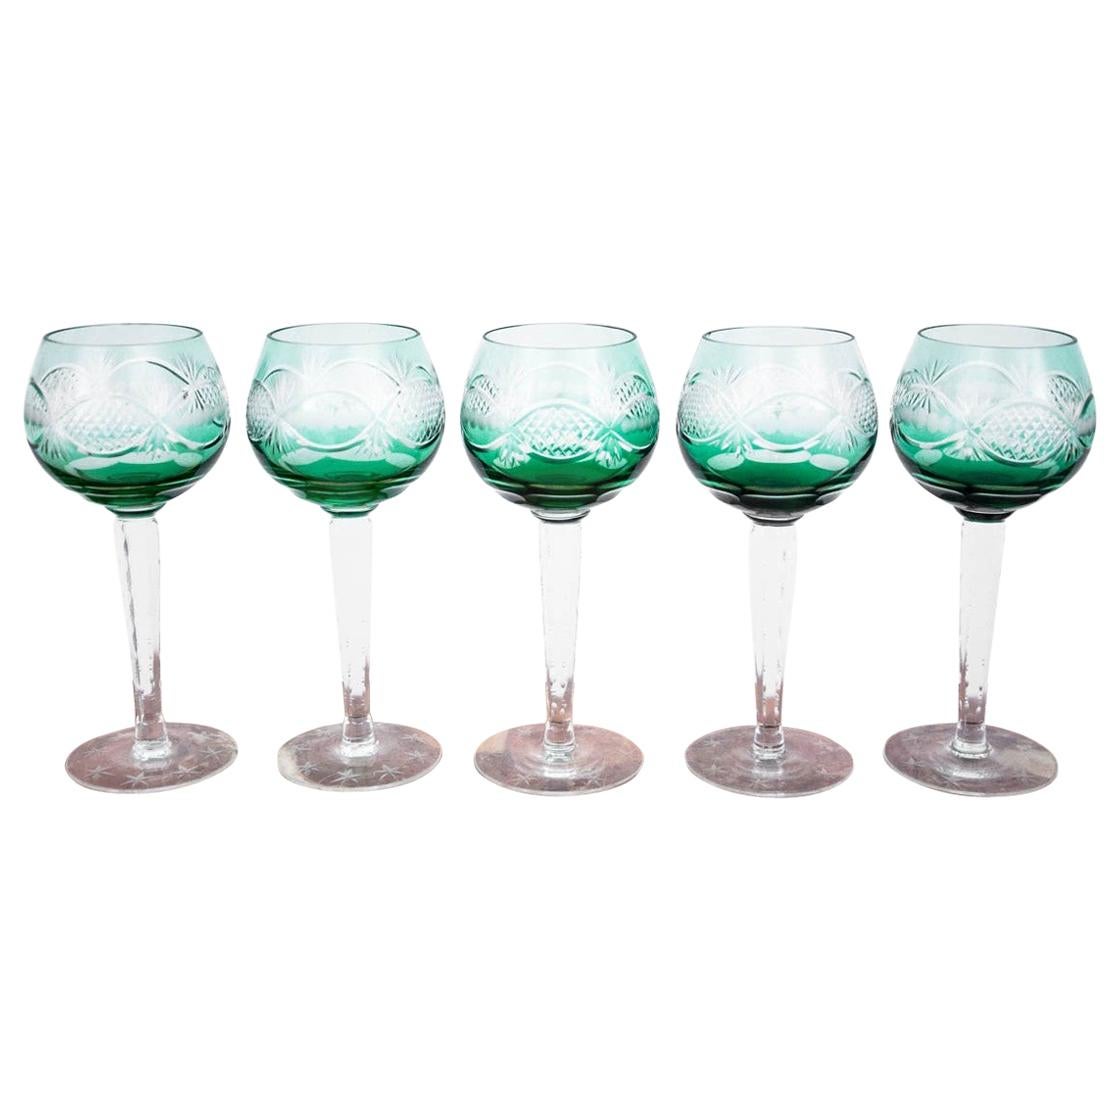 Midcentury Green Crystal Glasses, Poland, 1960s, Set of 5